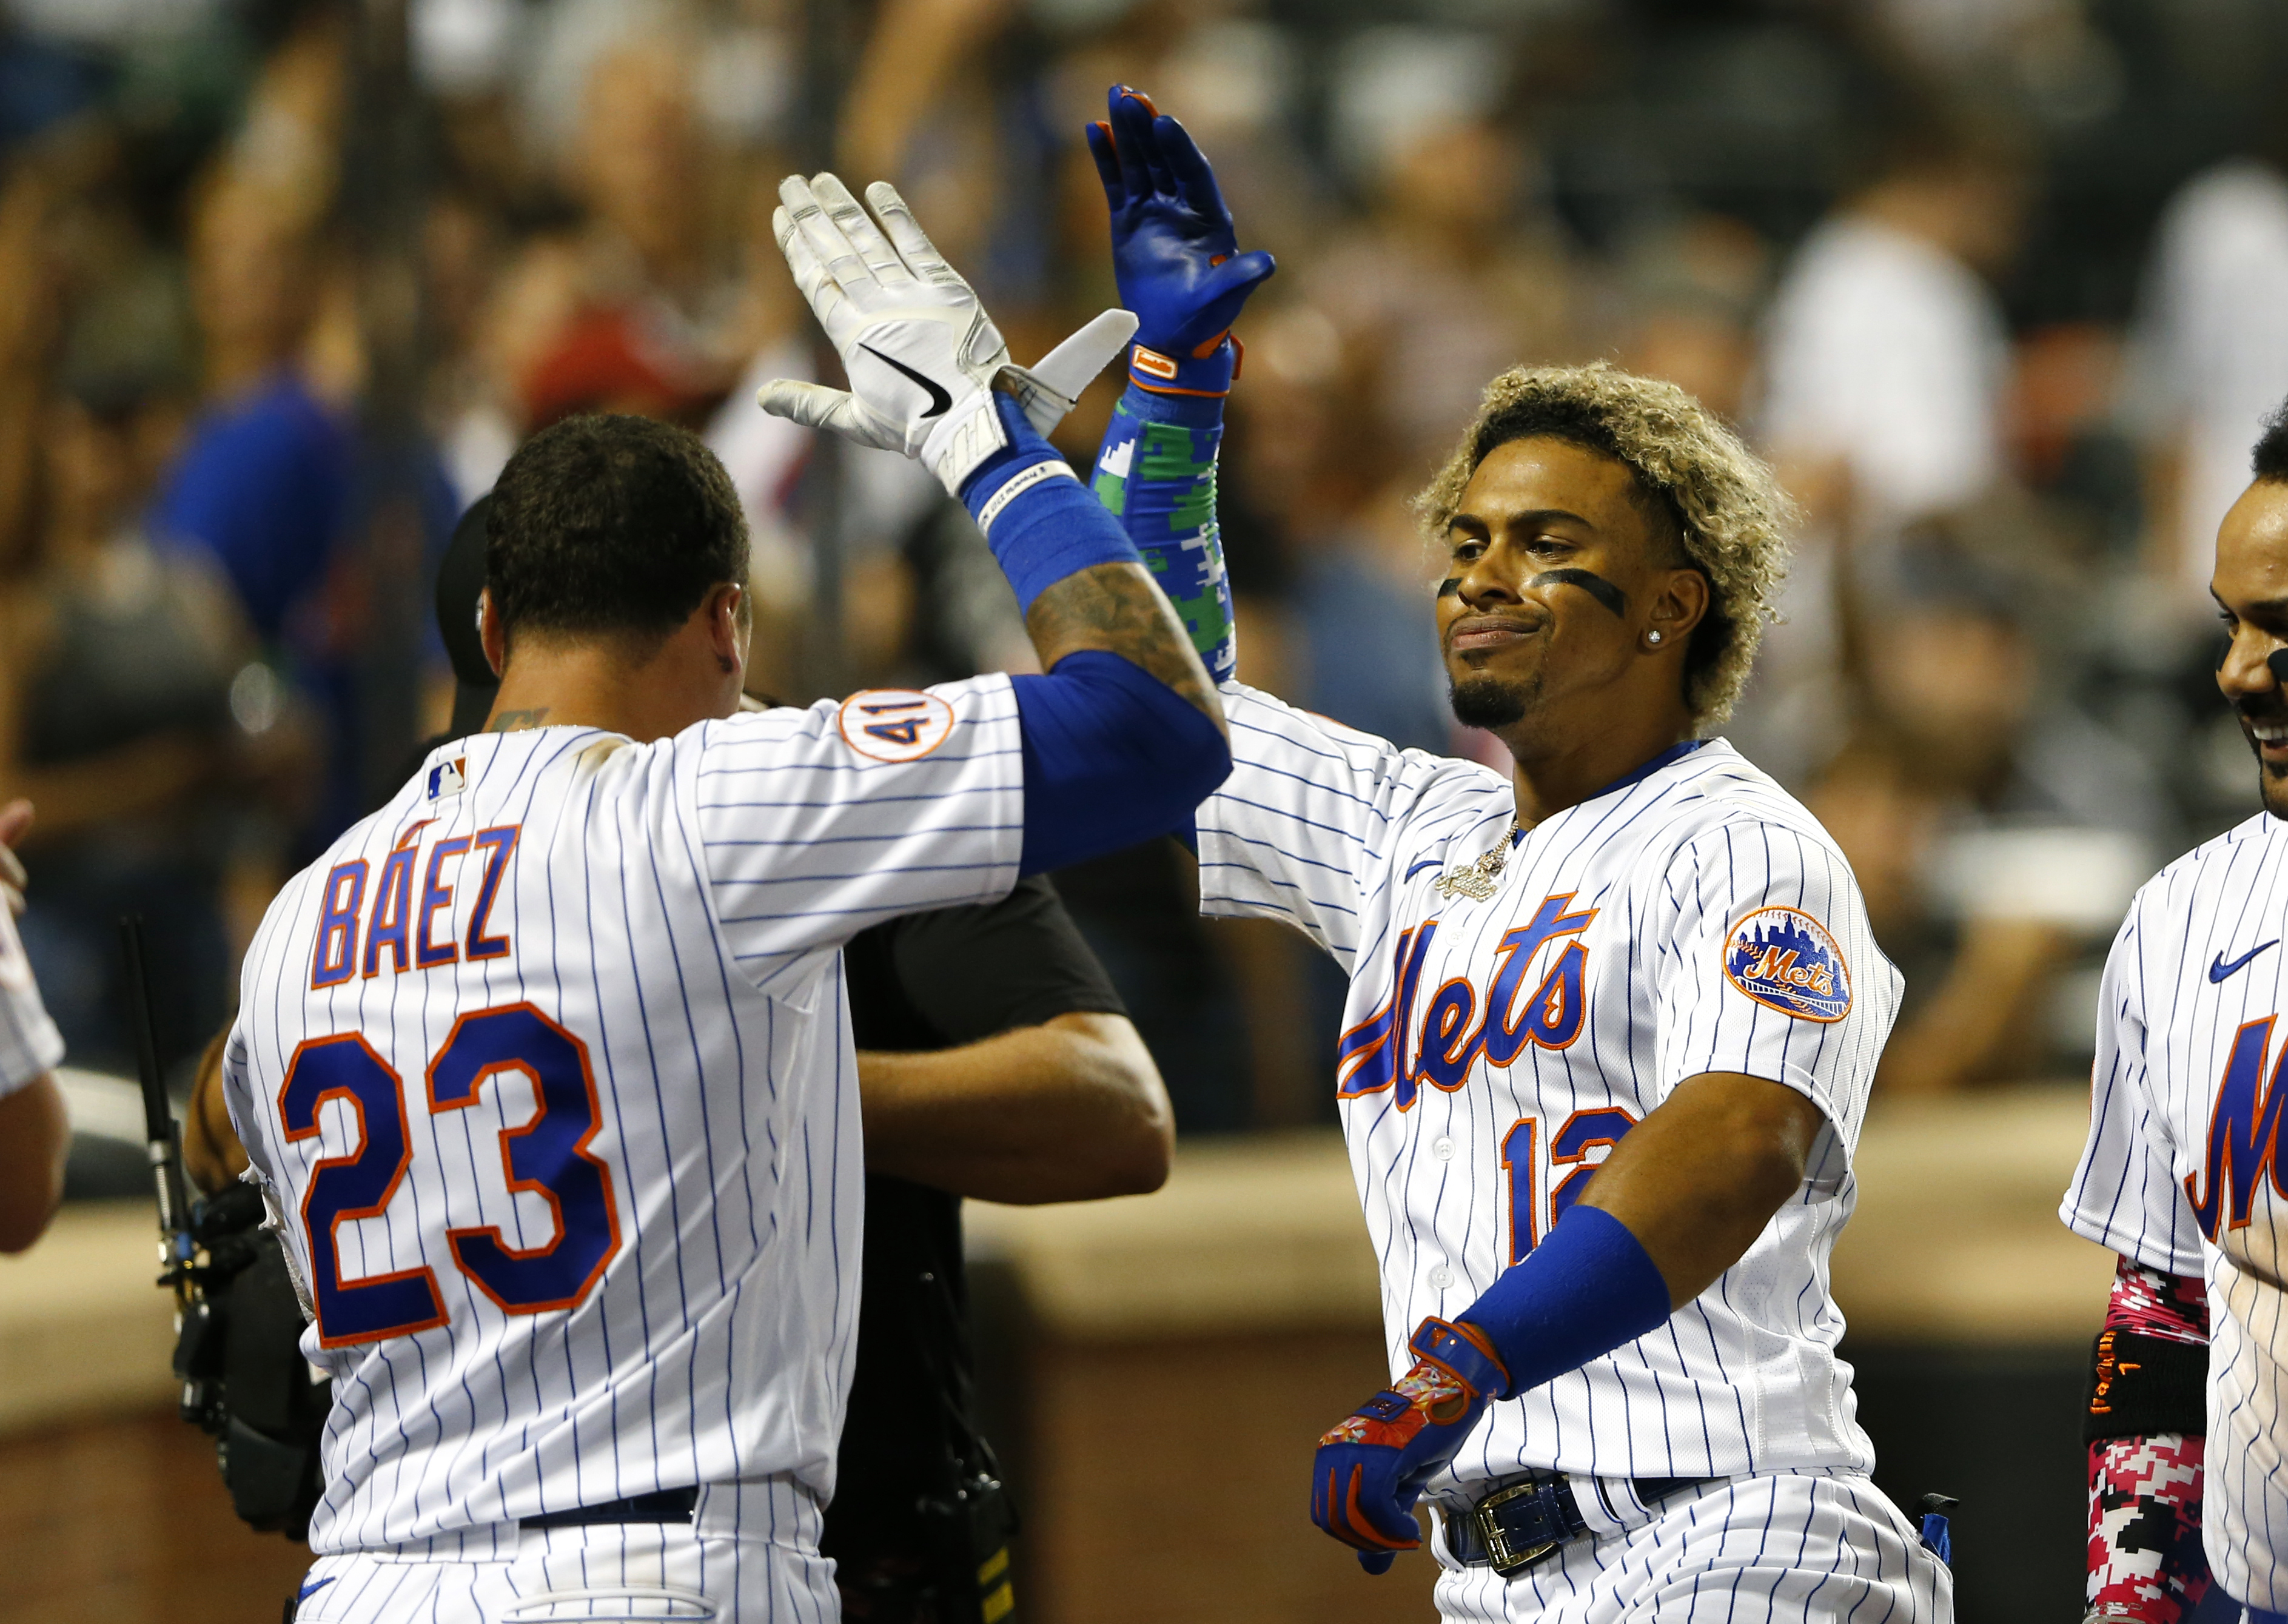 Javier Baez says Mets' thumbs-down celebration is response to fans